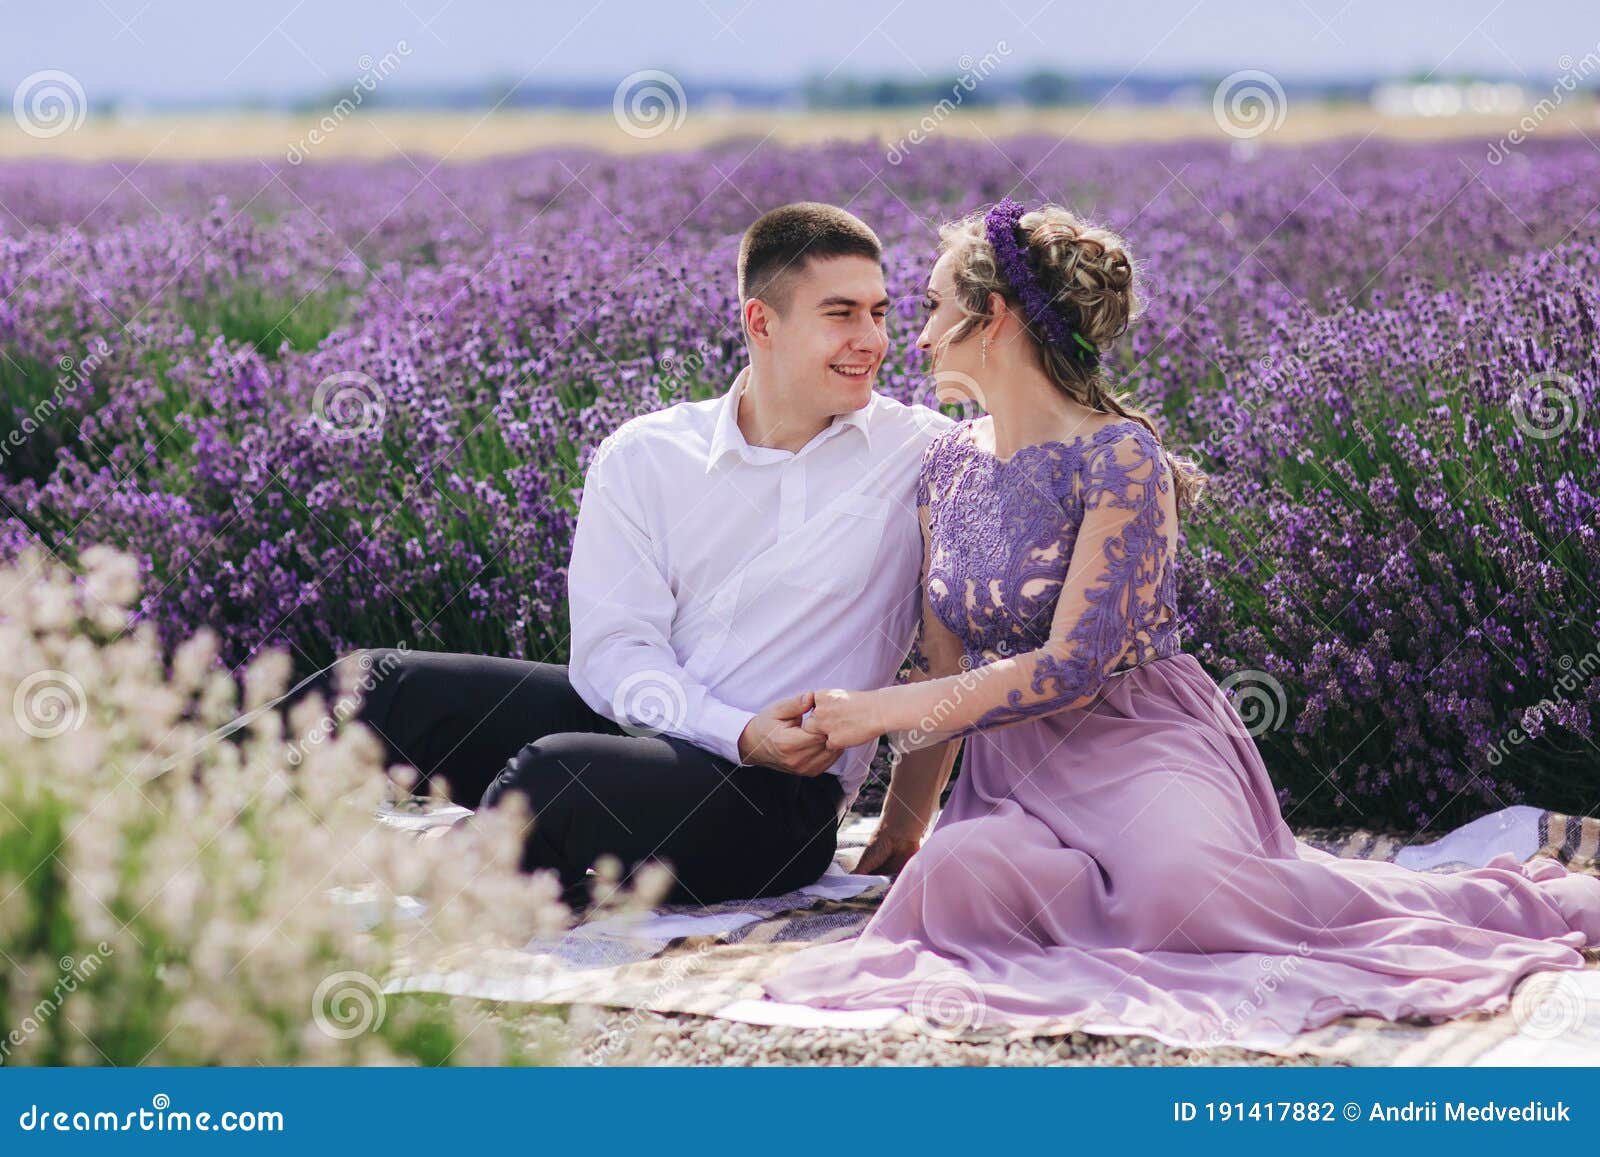 Young Couple in Love Hugging and Sitting in a Lavender Field on Summer  Clody Day. Girl in a Luxurious Purple Dress and with Stock Photo - Image of  flower, groom: 191417882